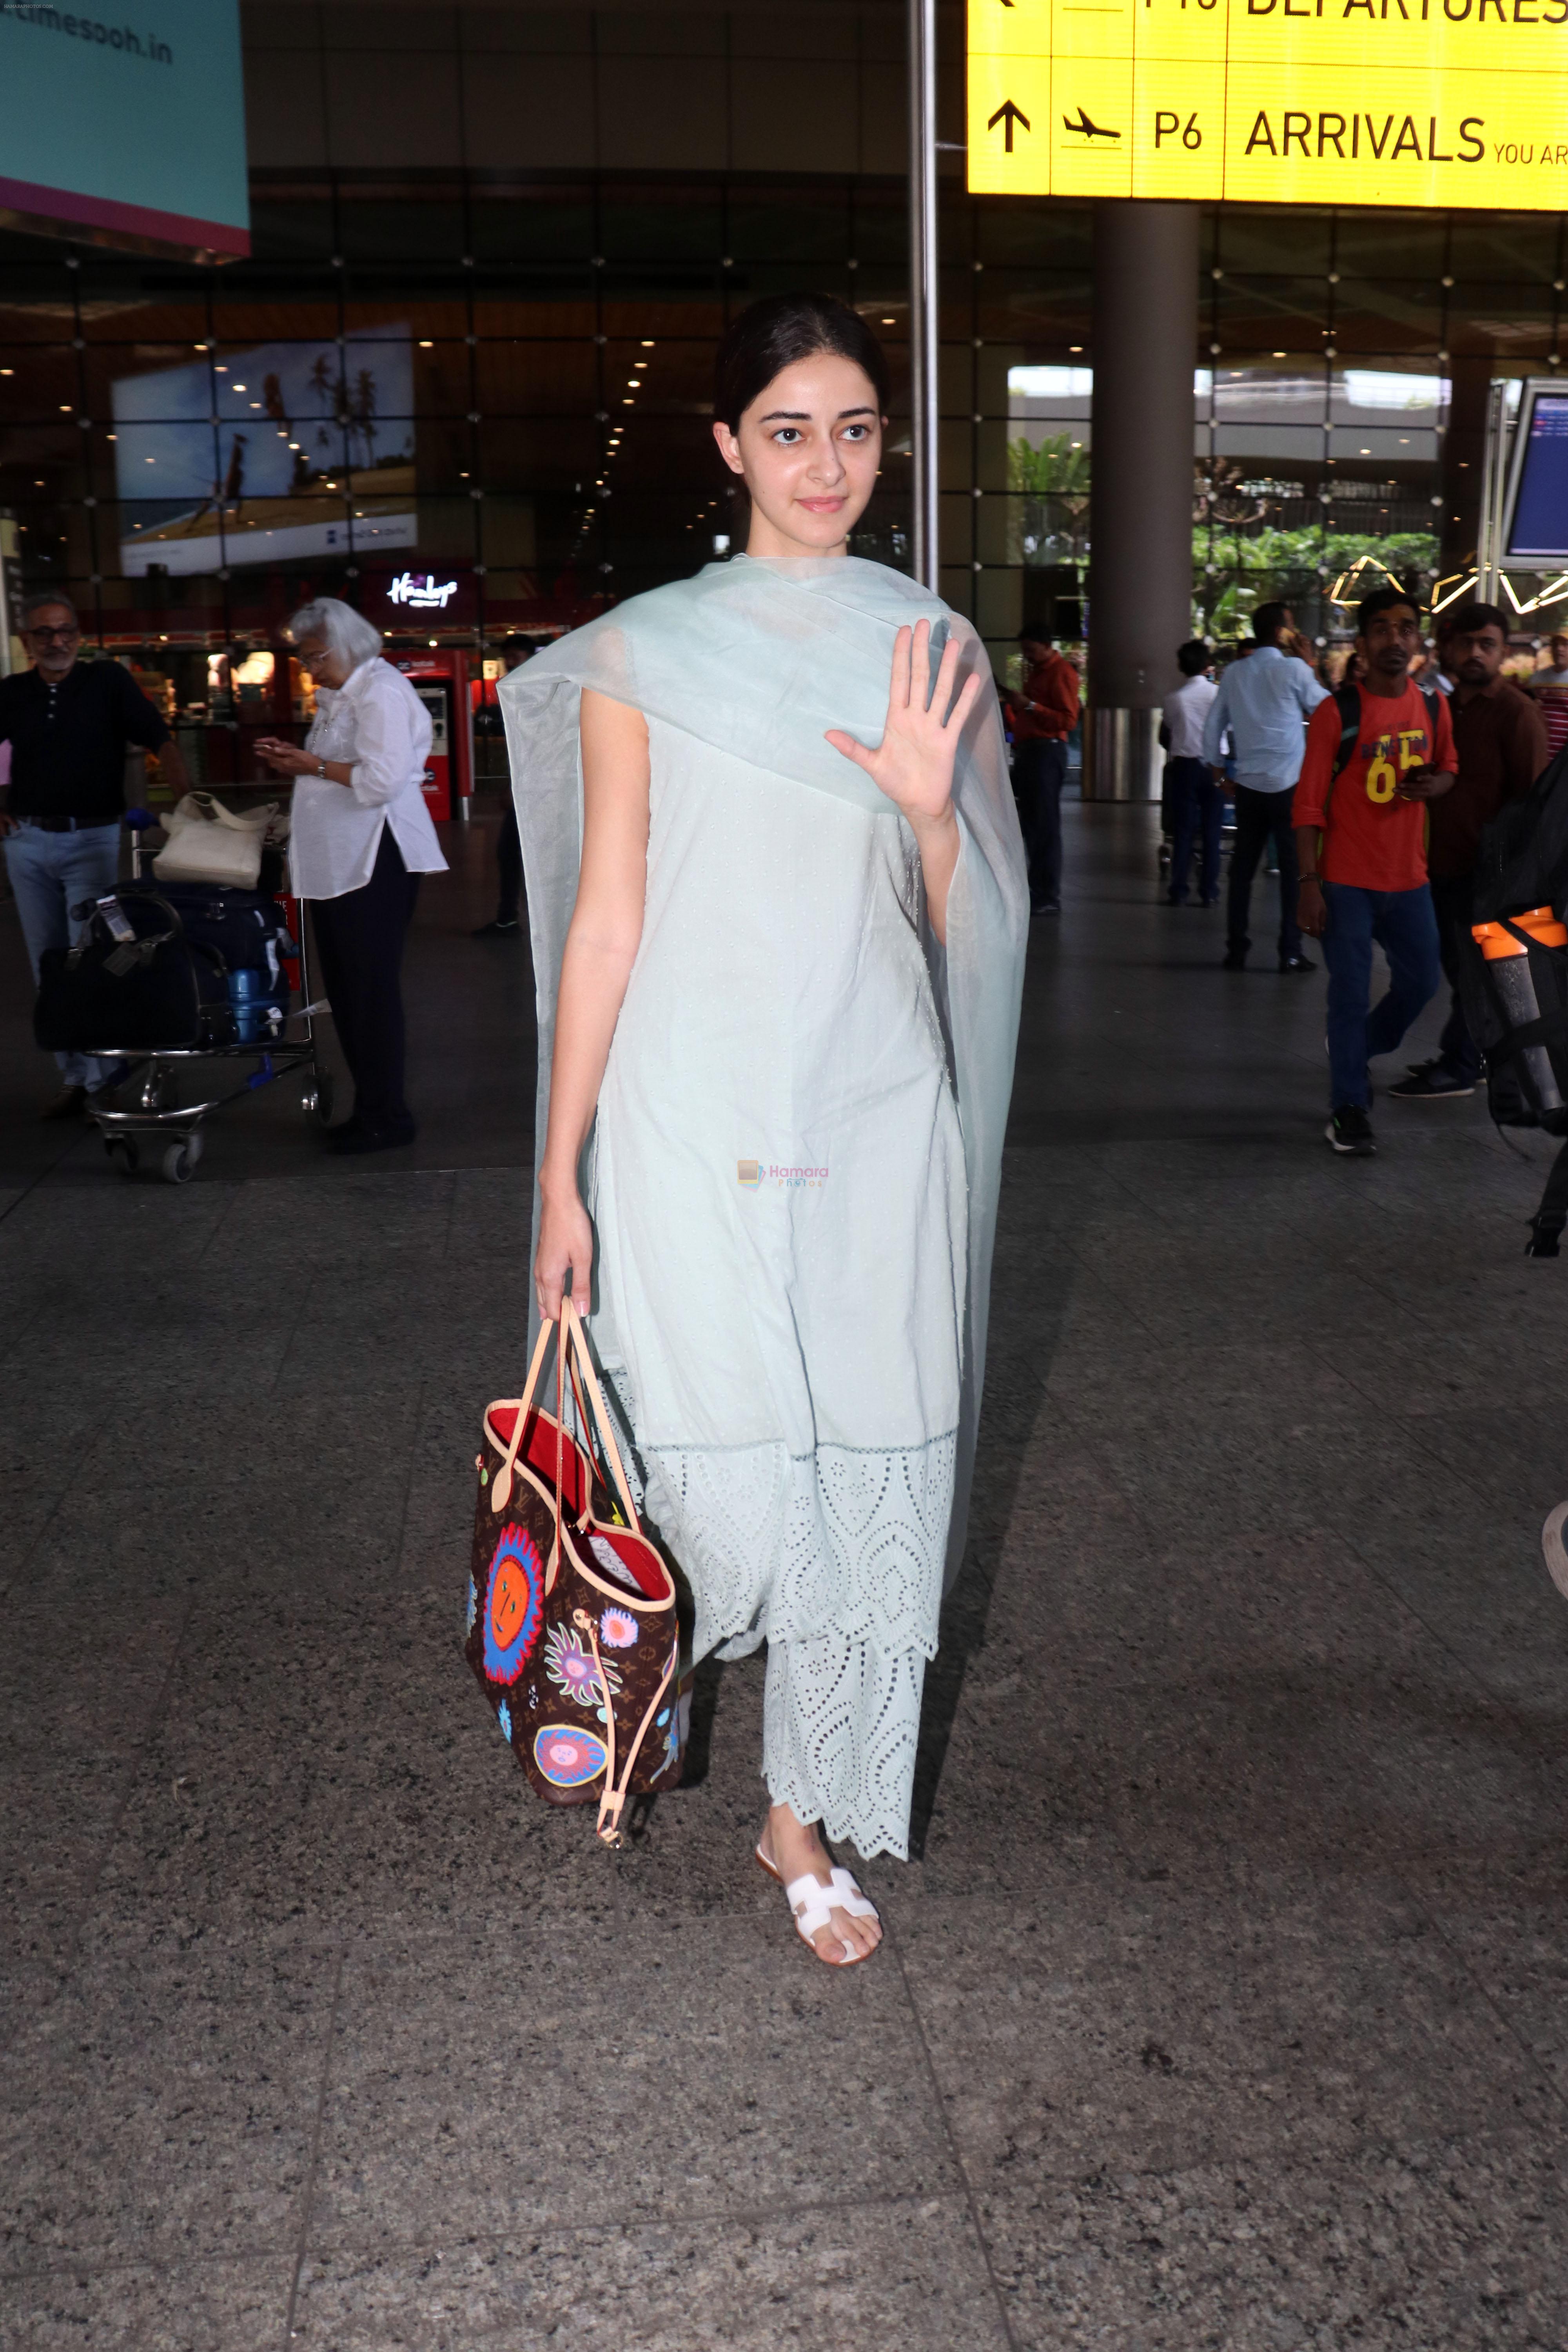 Masked Ananya Panday returns from Dubai decked in limited edition Louis  Vuitton worth over Rs 4 lakh, Rs 3k Playboy joggers. SEE PICS